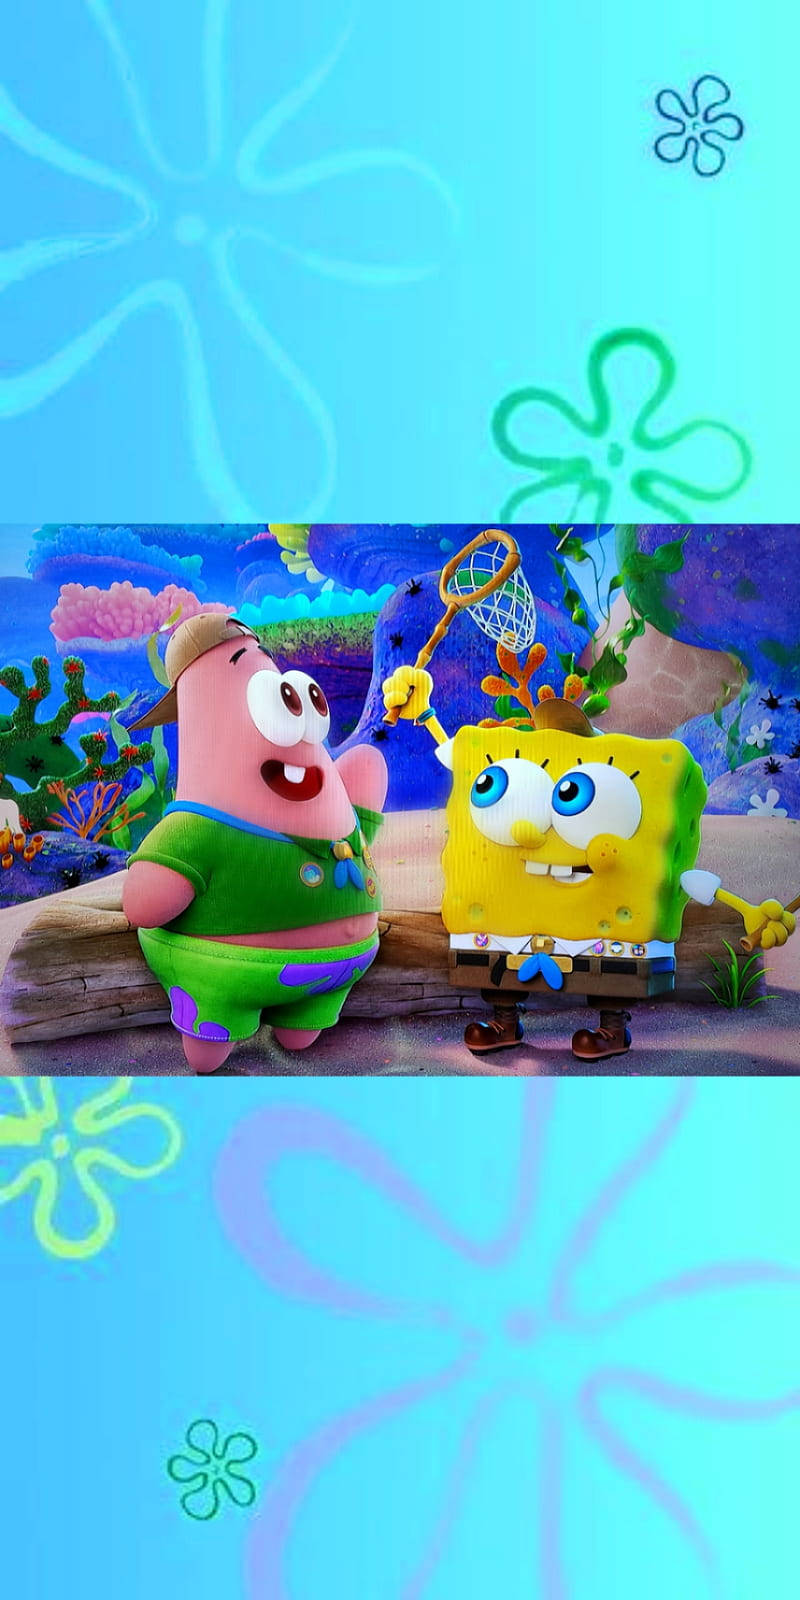 Young Spongebob And Patrick Catching Jellyfish Background